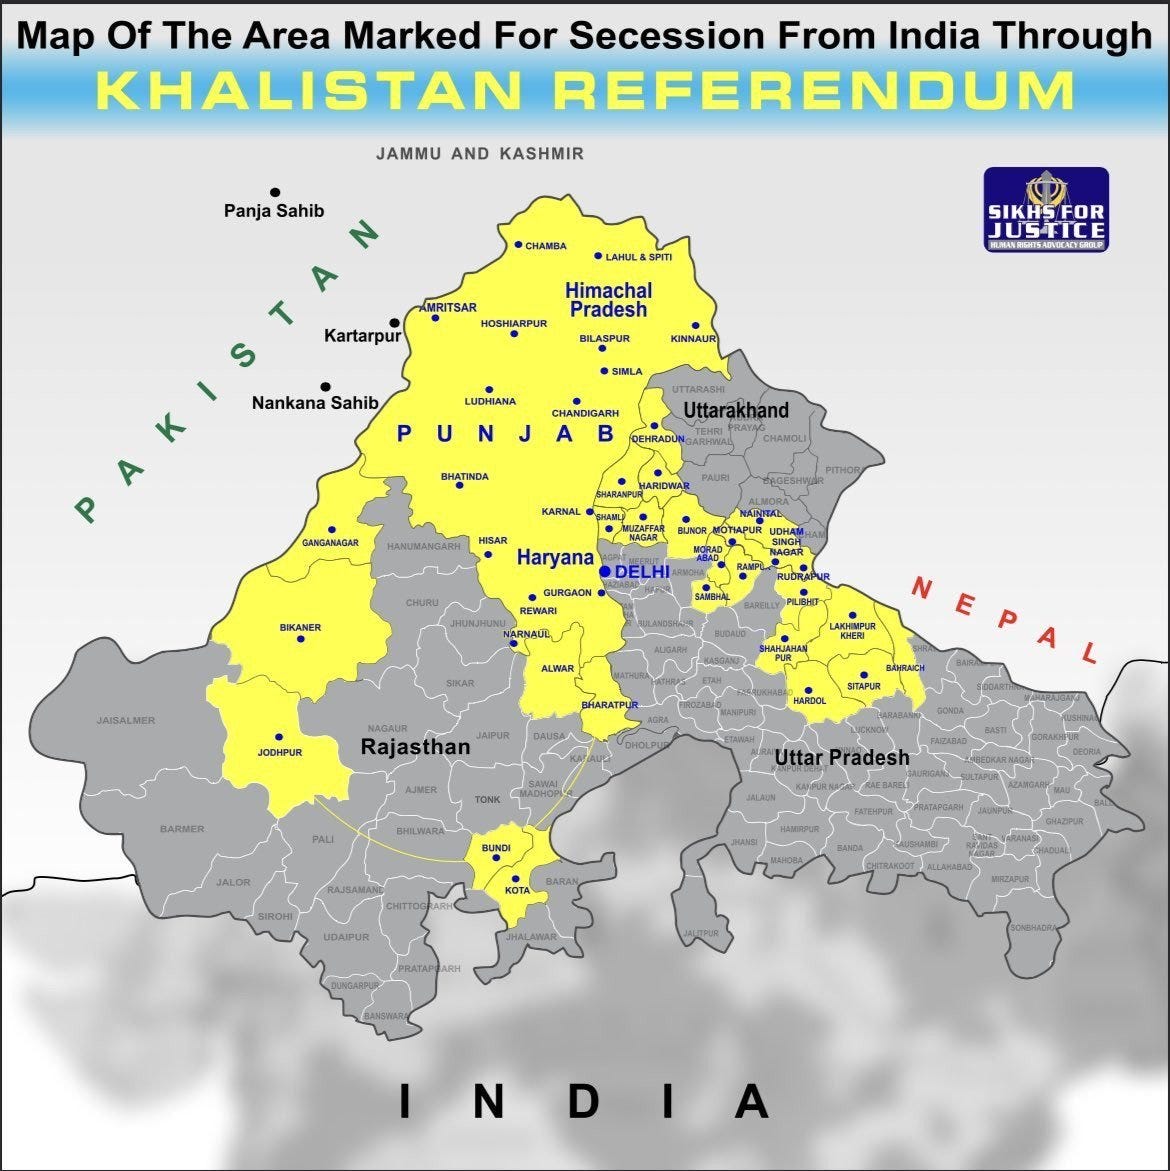 an organisation sikhs for justice released a new map of india showing not just punjab but haryana himachal pradesh and several districts of rajasthan and uttar pradesh as part of khalistan photo twitter sikhpa